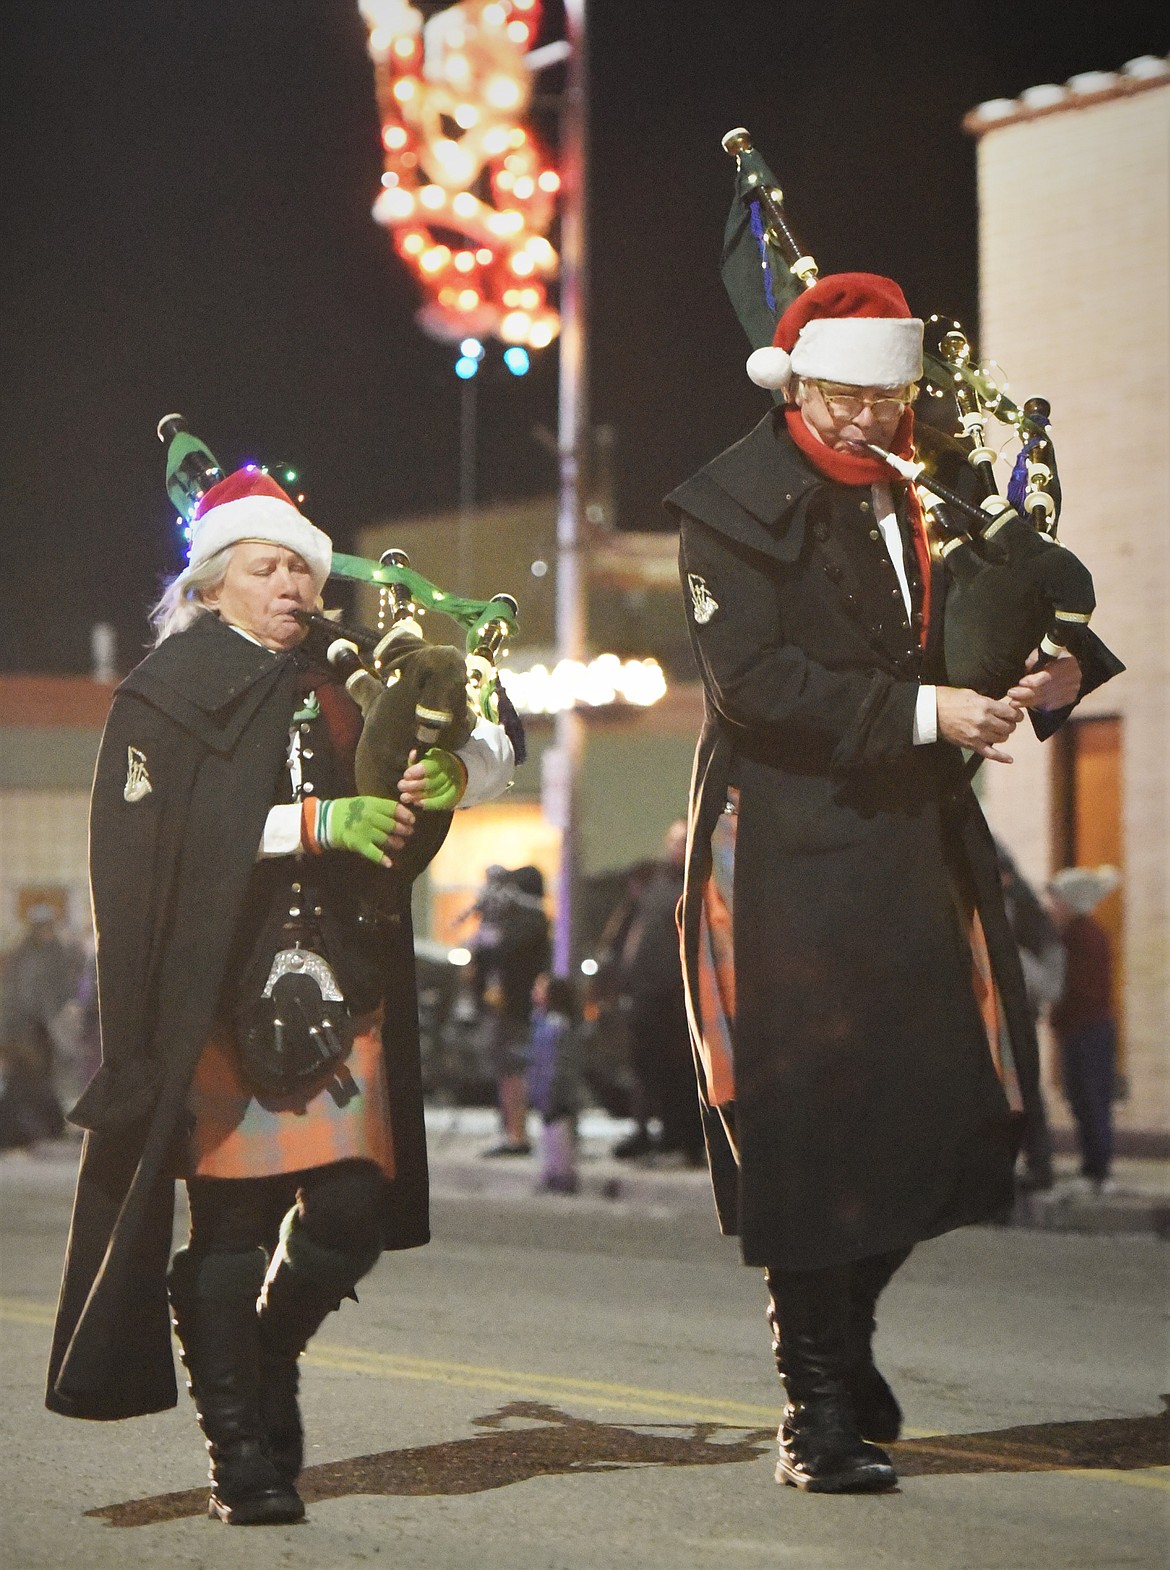 Bagpipers march and play during the 2021 Ronan Parade of Lights down Main Street. (Scot Heisel/Lake County Leader)